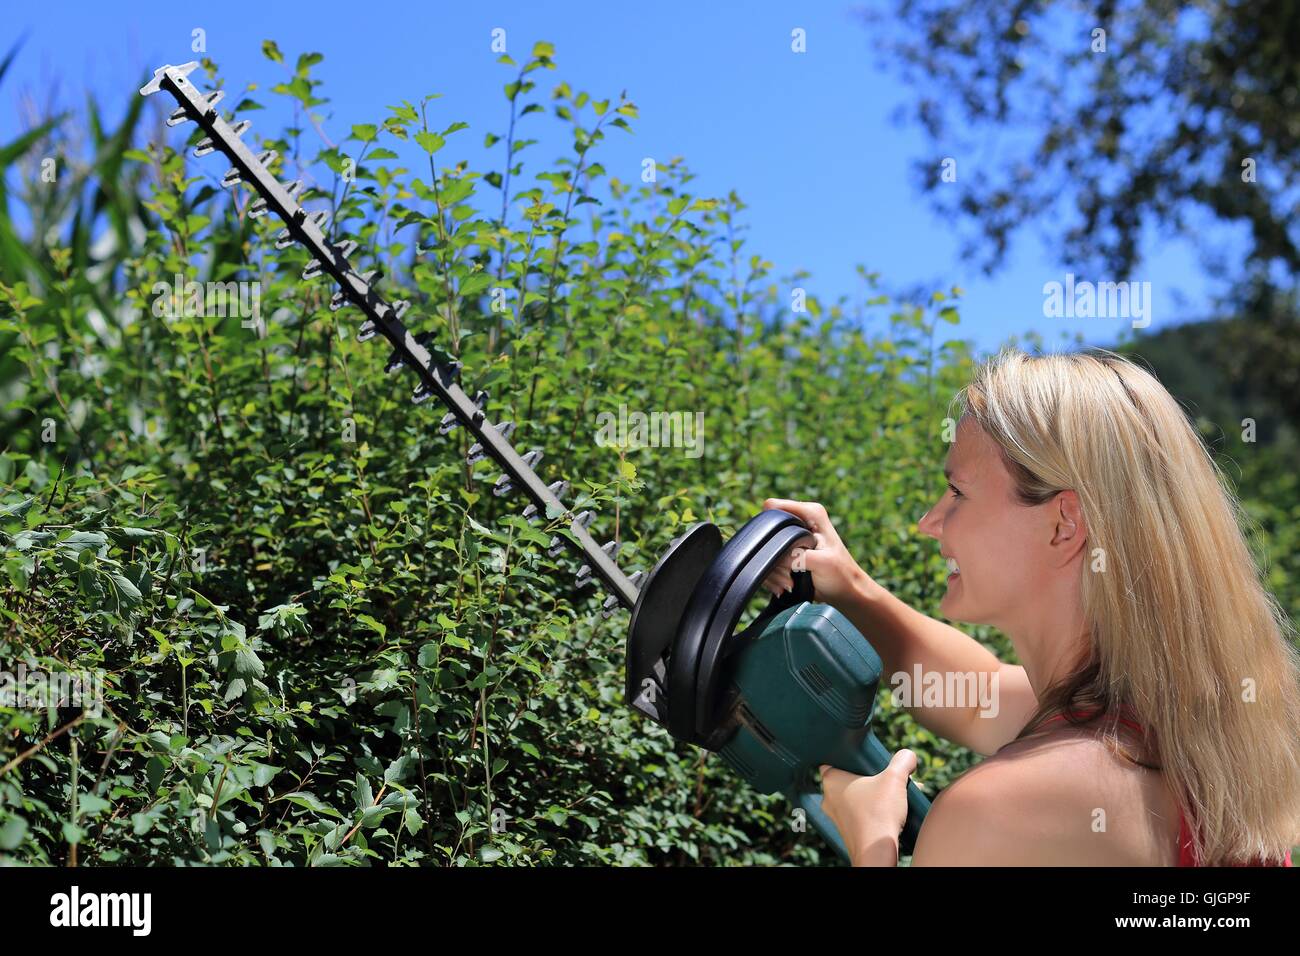 A Woman cutting a  hedge Stock Photo